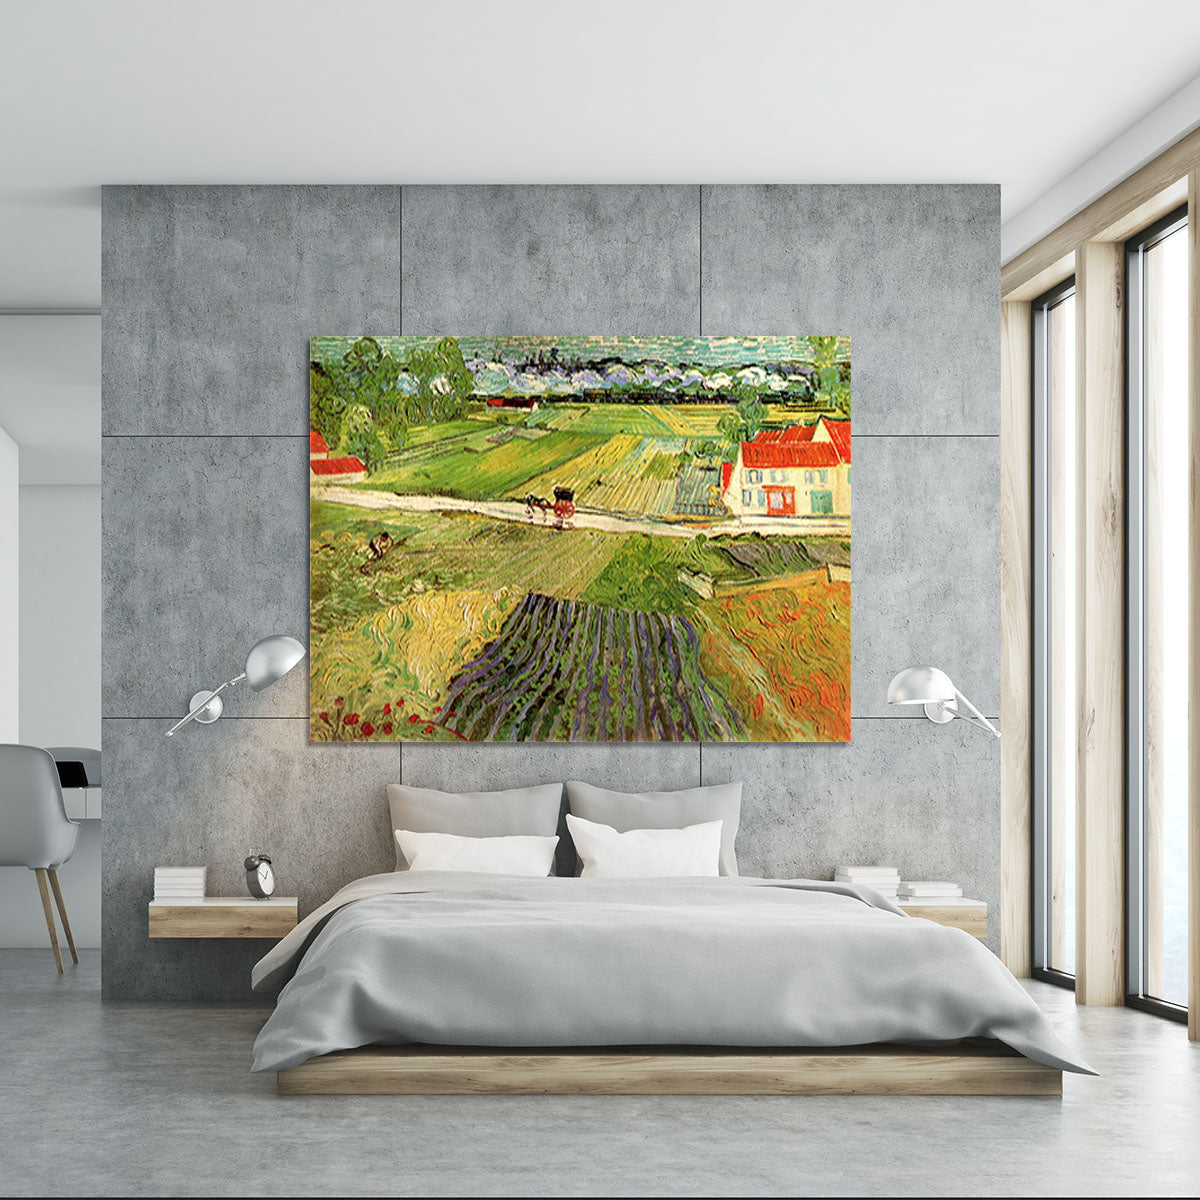 Landscape with Carriage and Train in the Background by Van Gogh Canvas Print or Poster - Canvas Art Rocks - 5